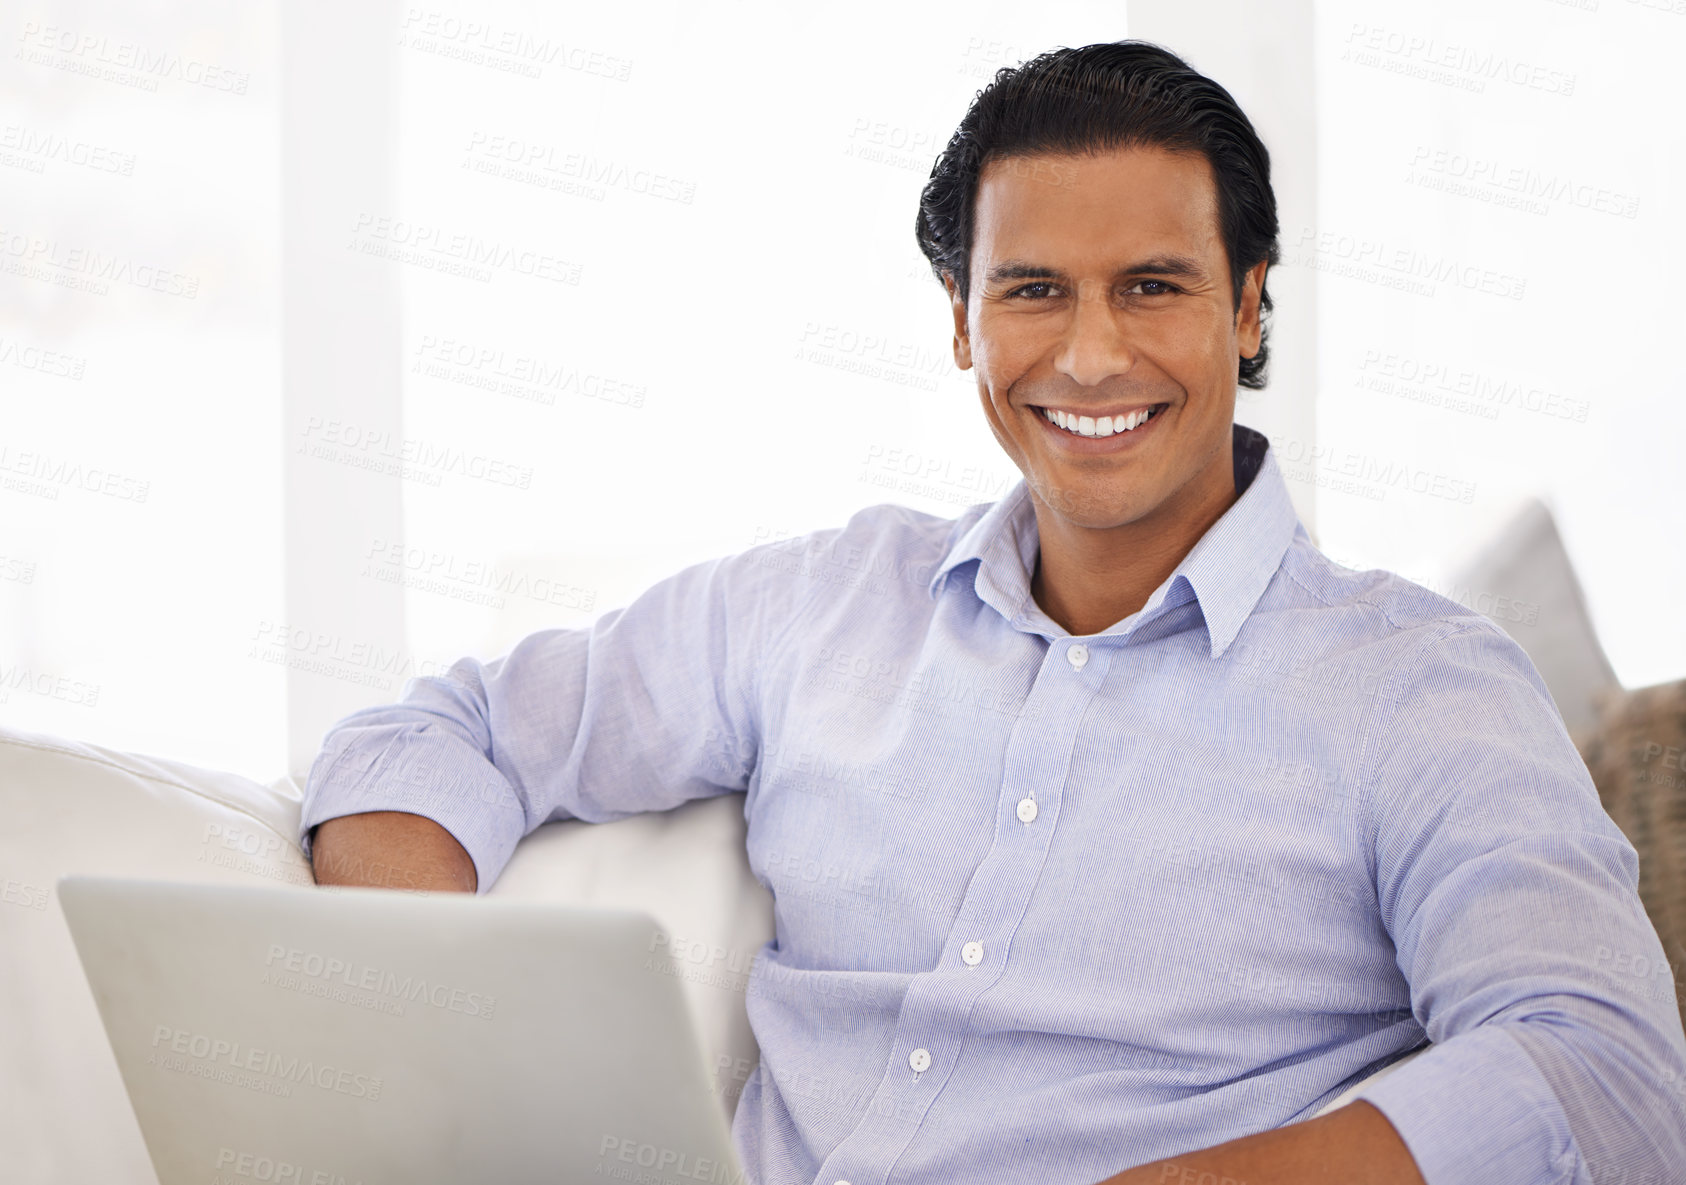 Buy stock photo A handsome young man using his laptop at home